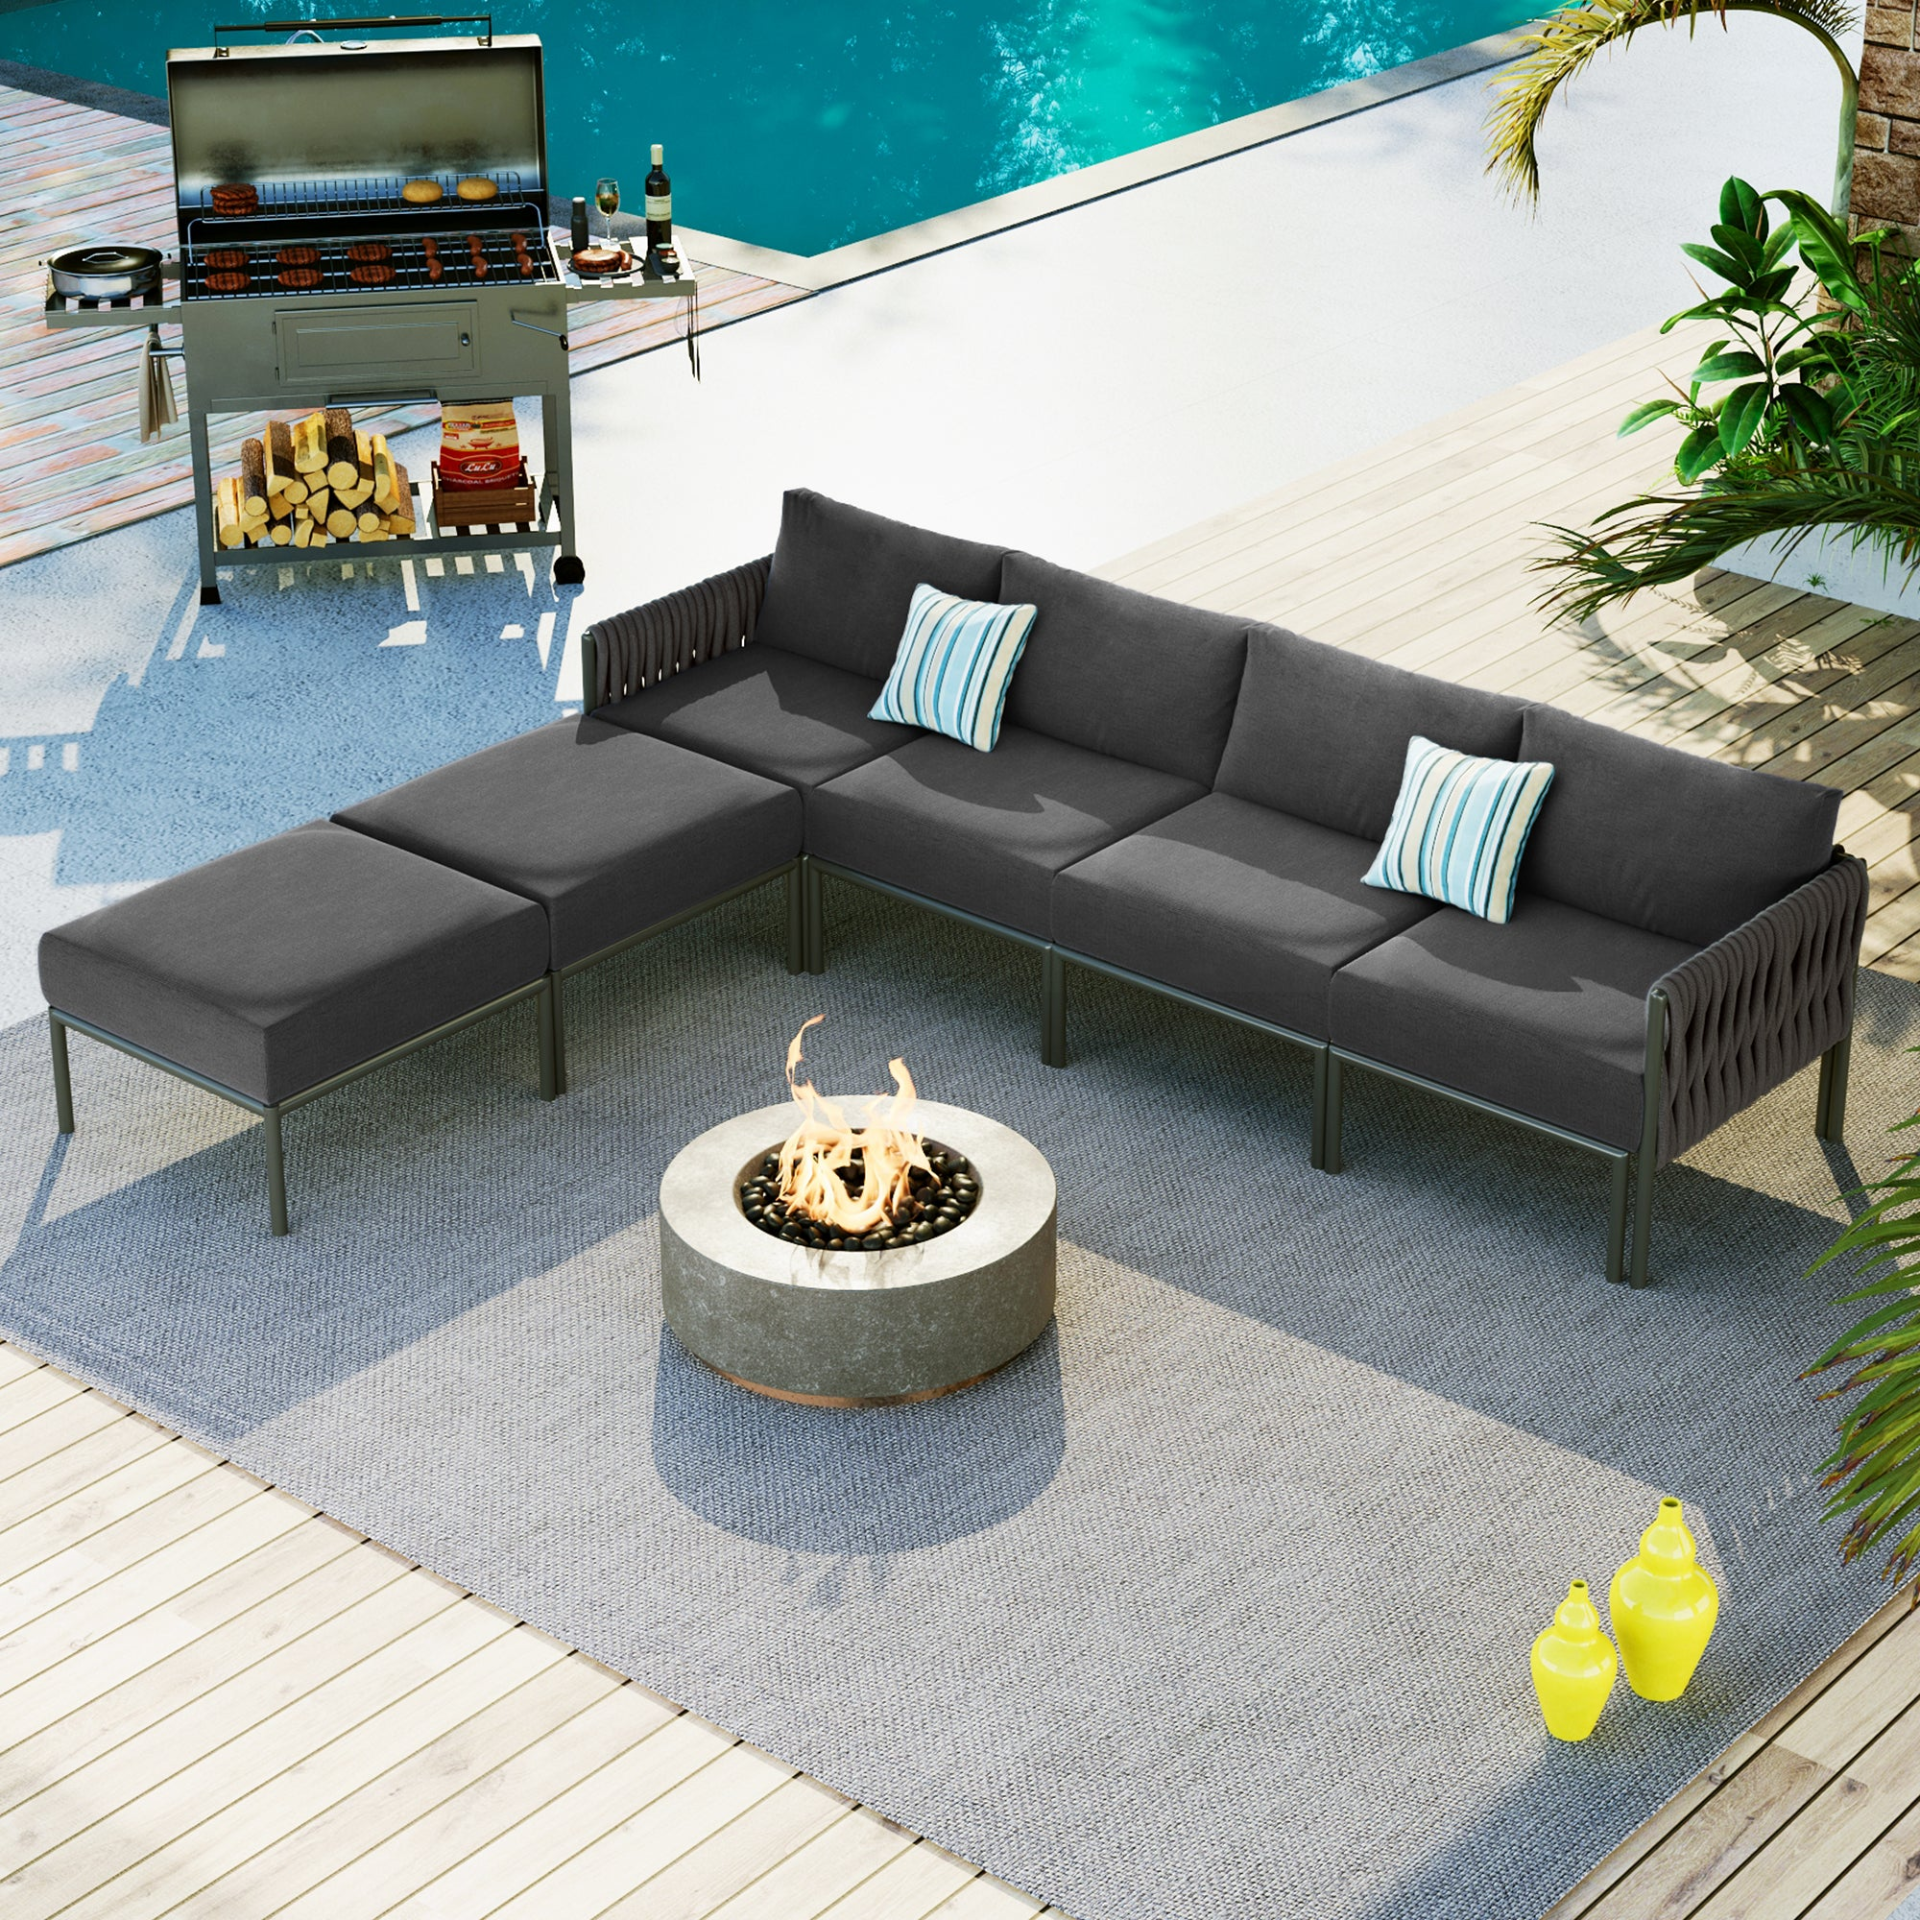 6-Pieces Aluminum Patio Furniture Set, Modern Metal Outdoor Conversation Set Sectional Sofa With Removable Olefin Extra Thick Cushions 5.9" Cushion, Grey